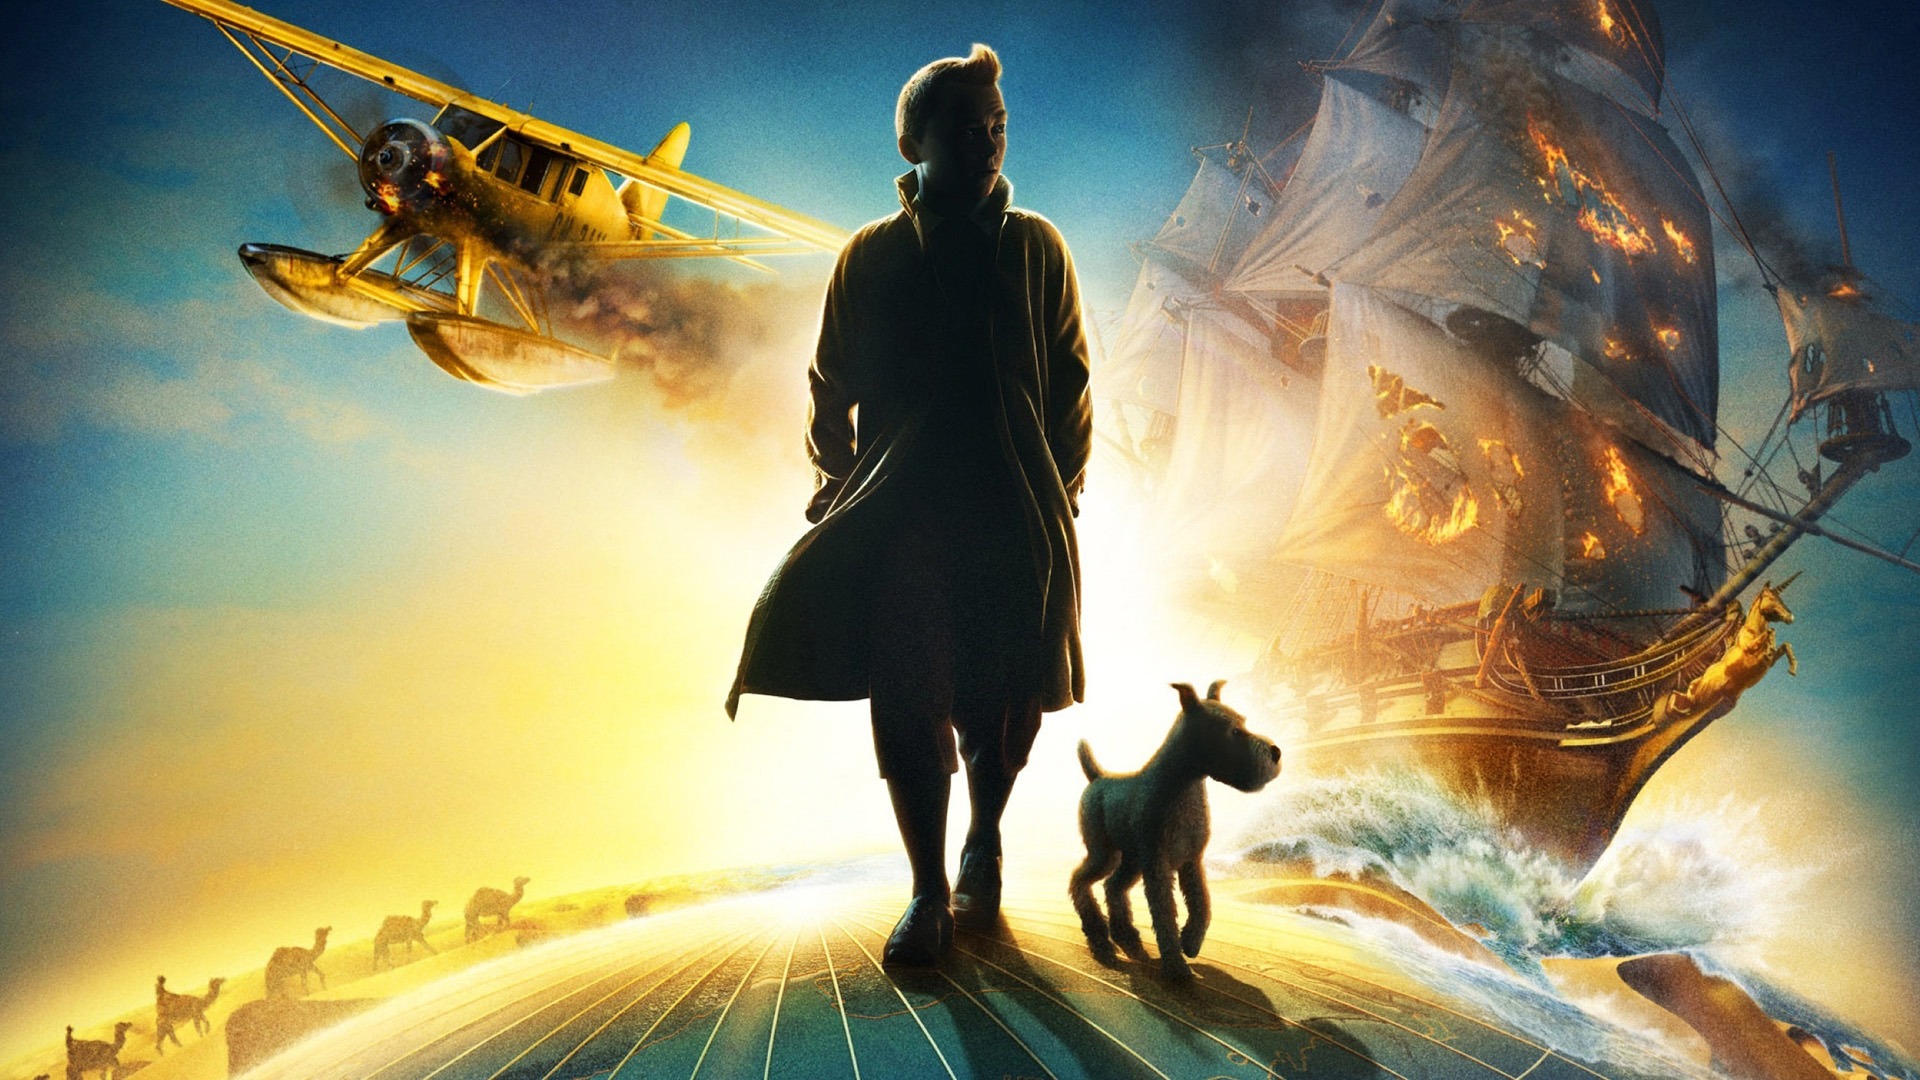 The Adventures of Tintin HD Wallpapers #1 - 1920x1080